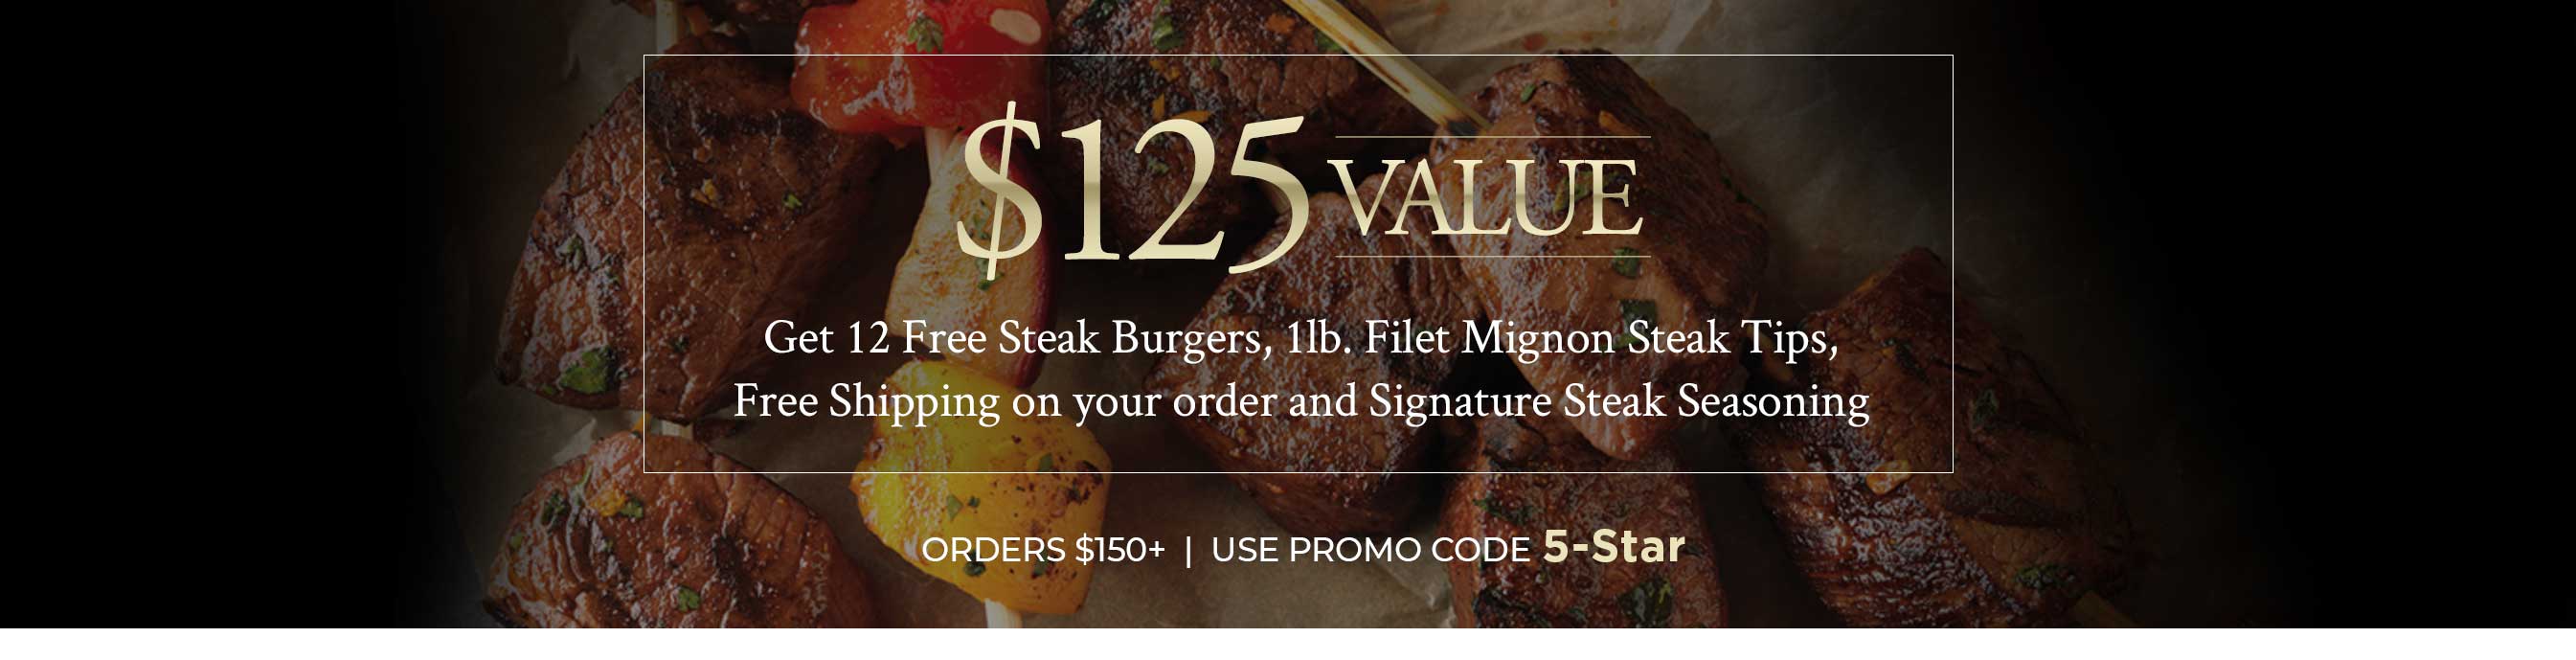 Get 12 Free Steak Burgers, 1lb. Filet Mignon Steak Tips, Free Shipping on your order and Signature Steak Seasoning   ORDERS $150+ USE PROMO CODE 5-Star